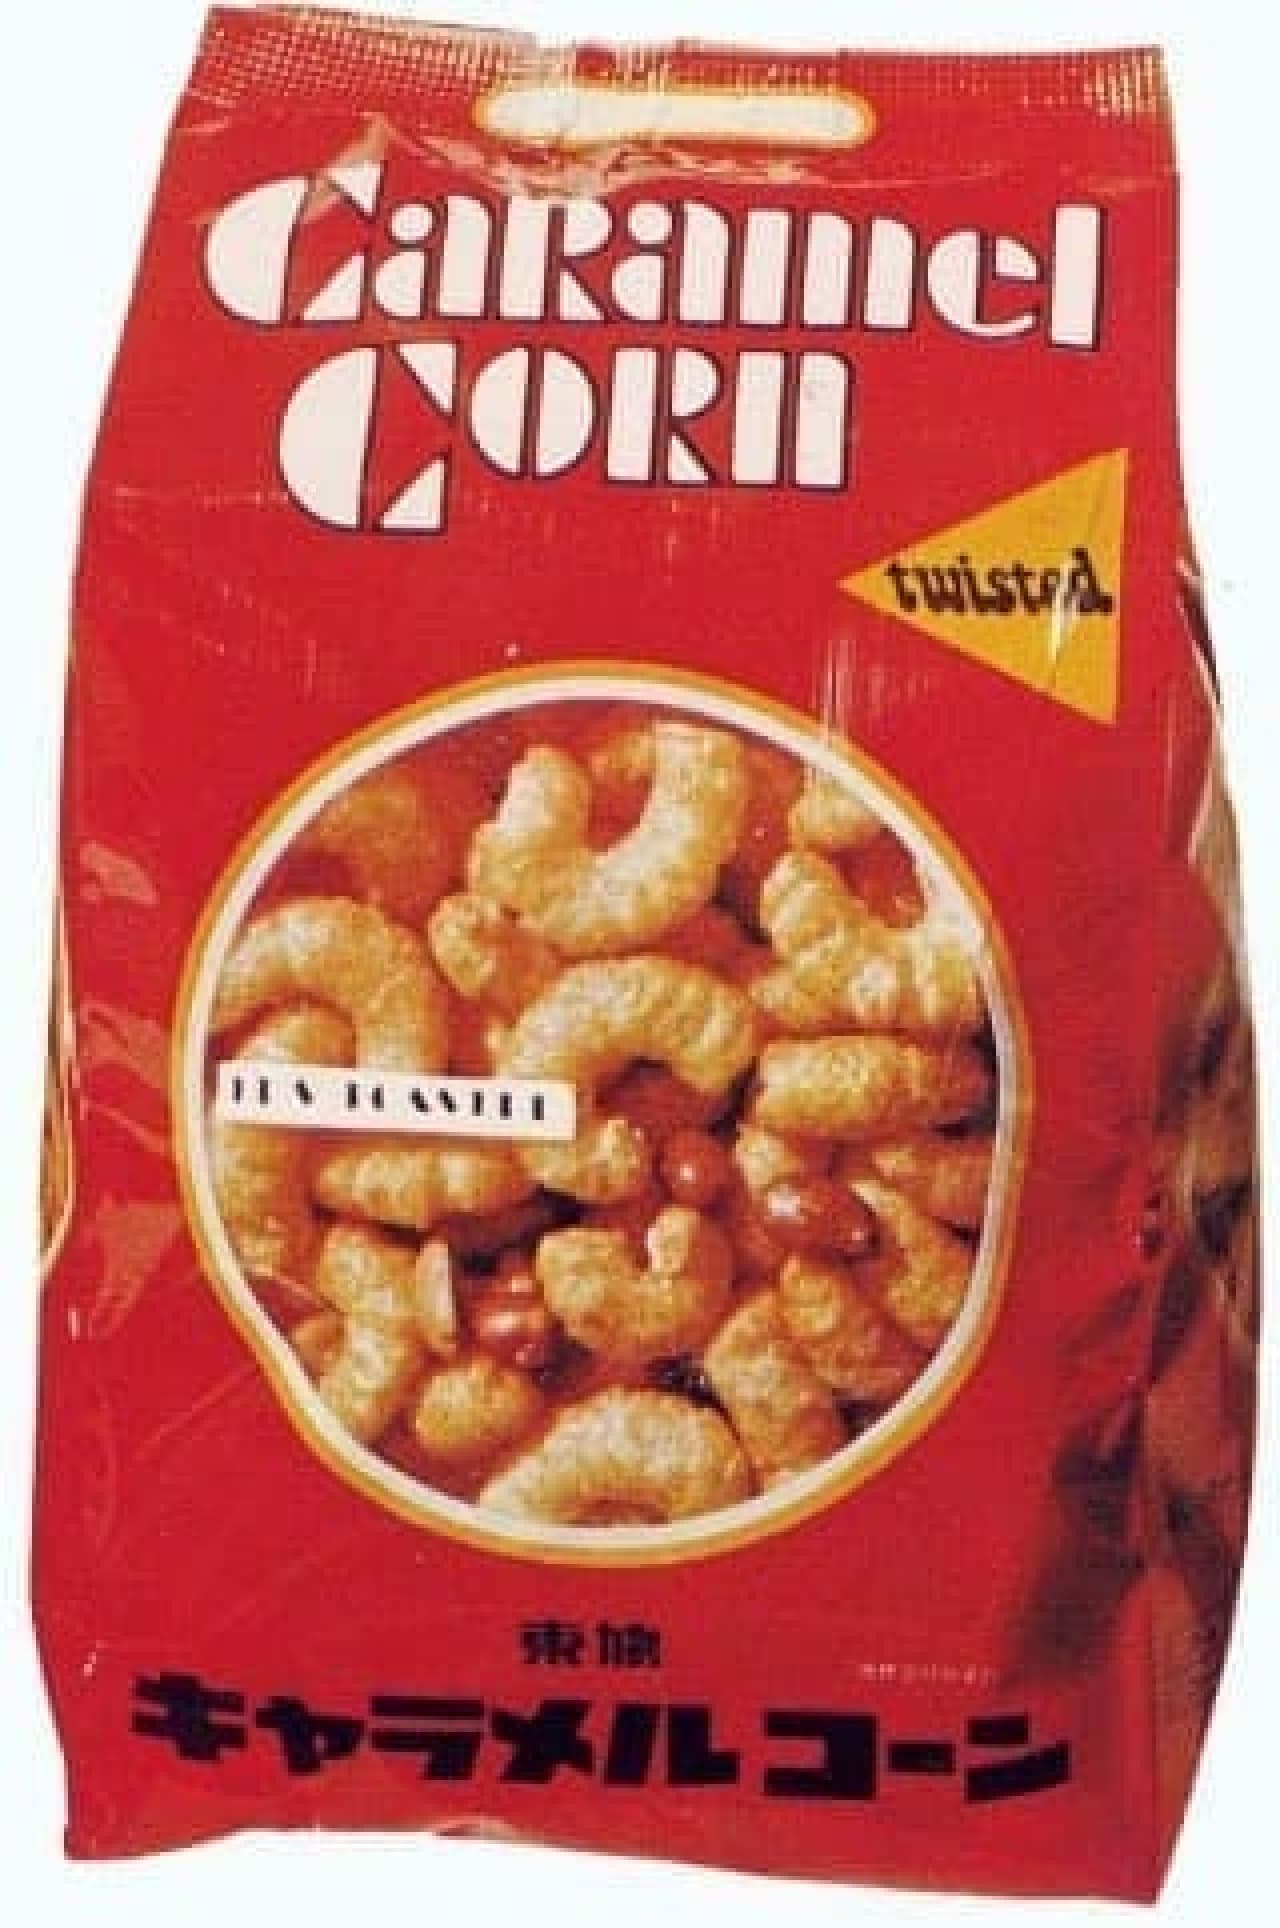 Tohato "Caramel Corn" at the time of its release in 1971